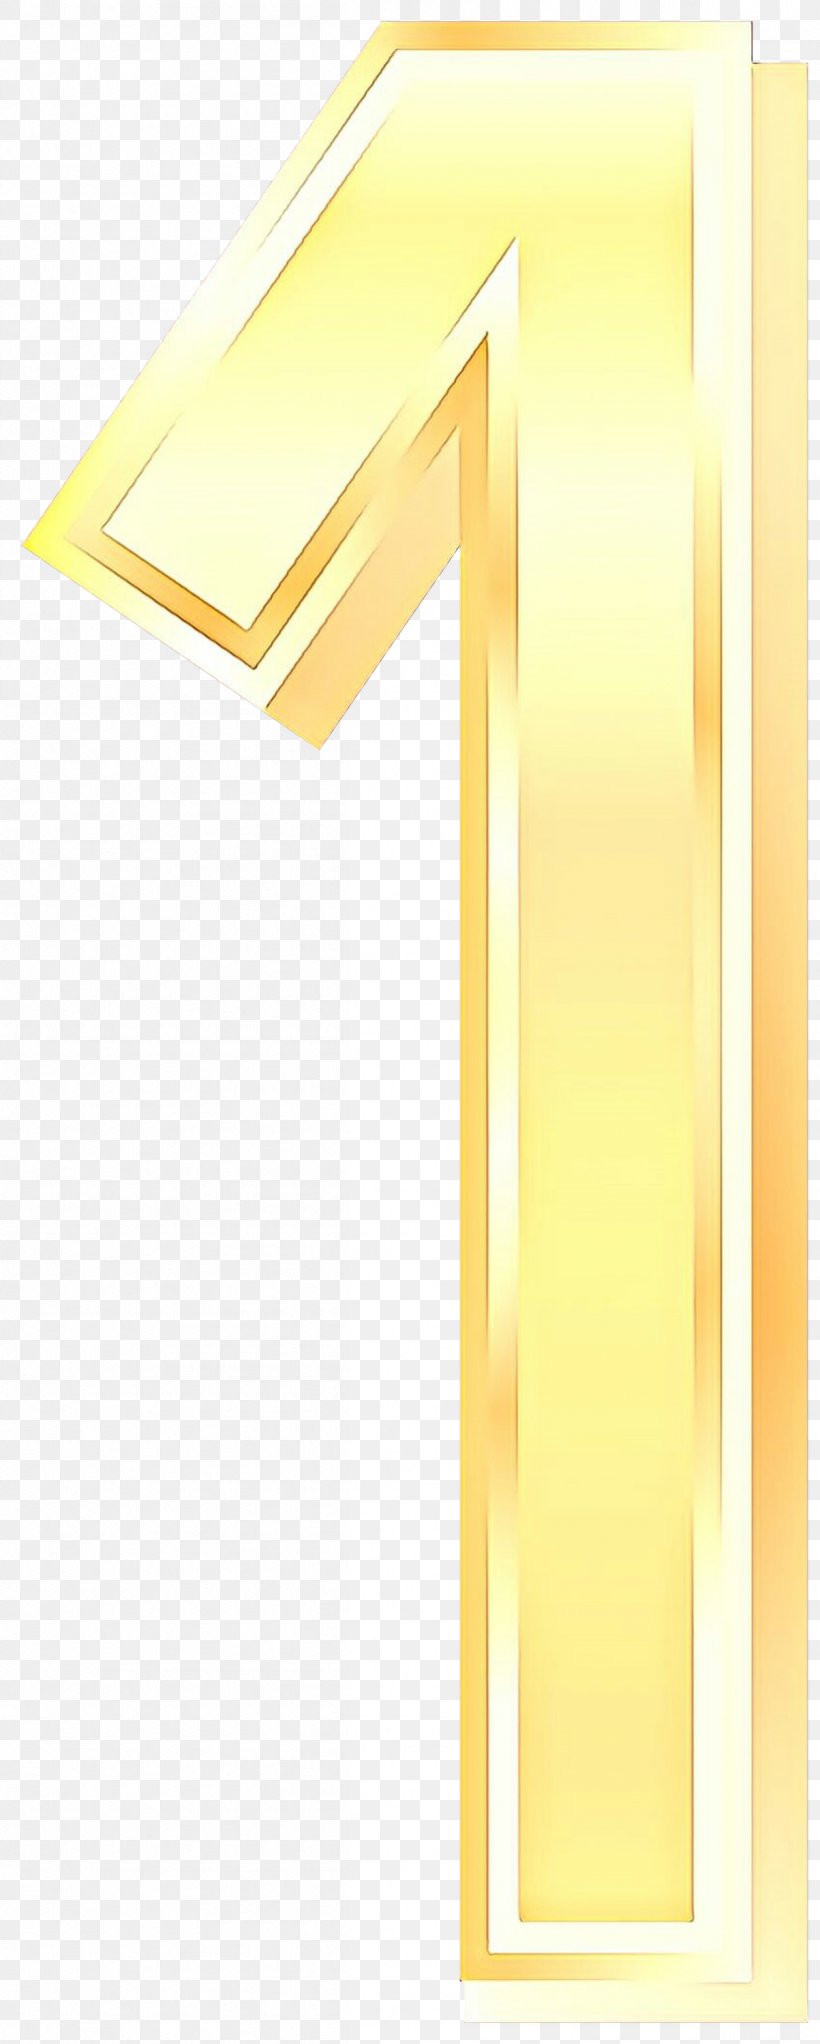 Yellow Line Material Property Brass, PNG, 1203x3000px, Cartoon, Brass, Material Property, Yellow Download Free